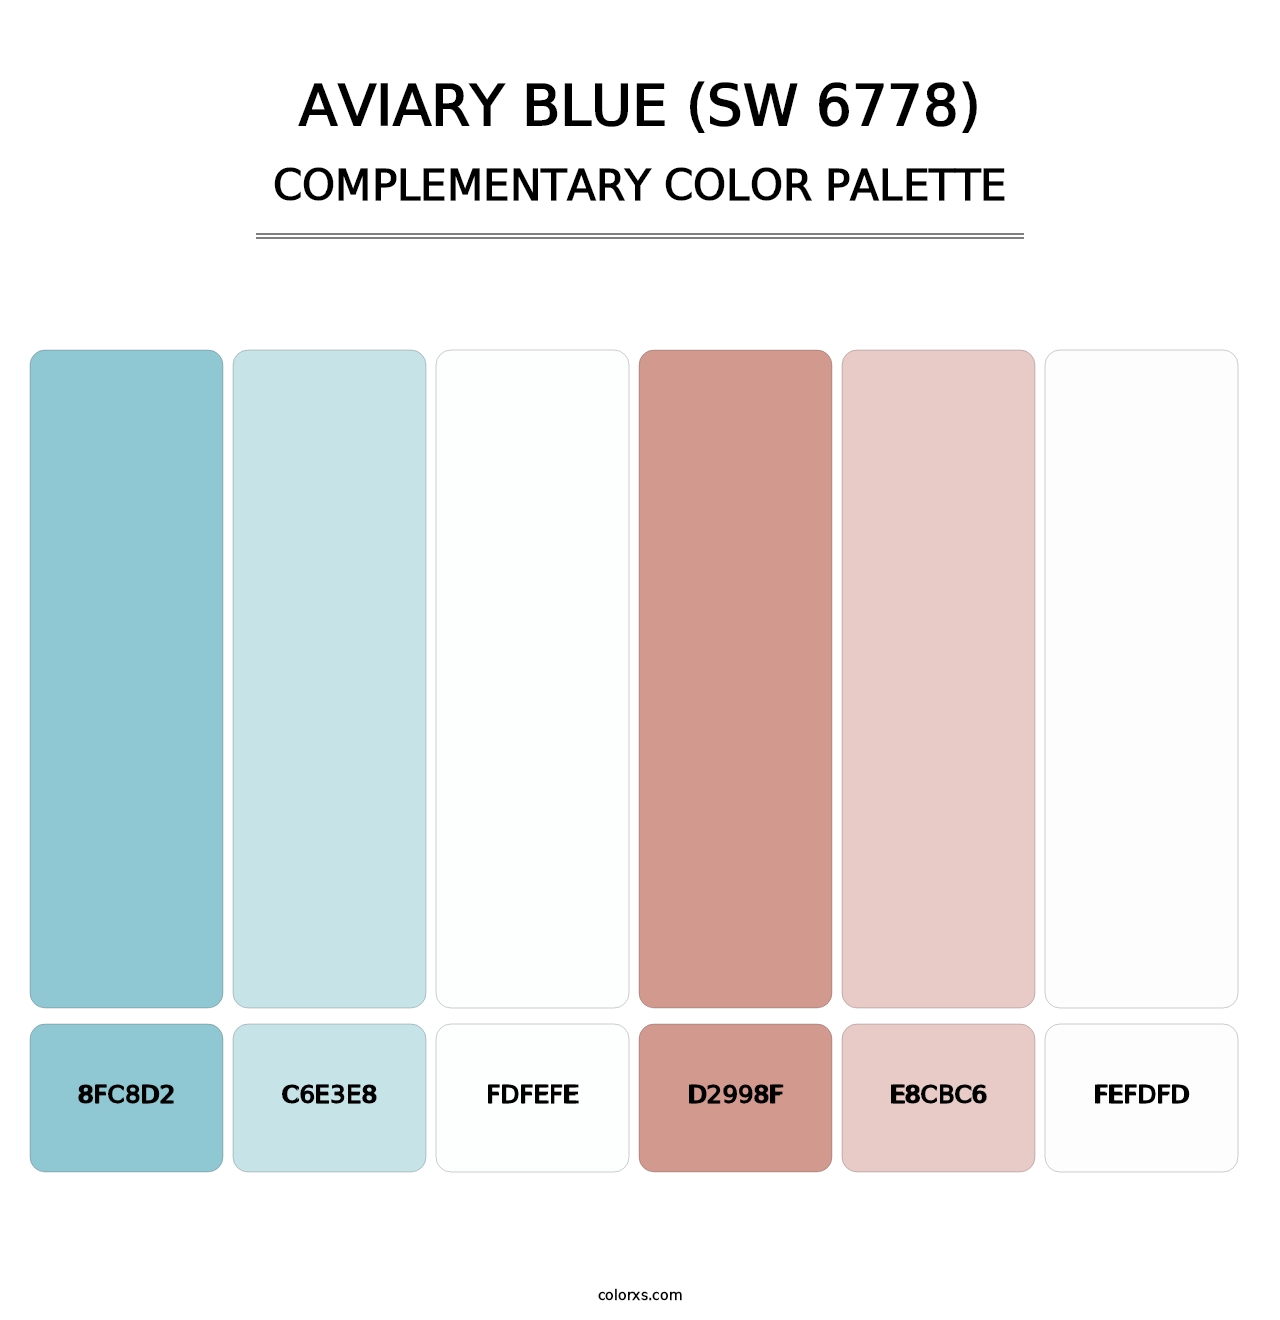 Aviary Blue (SW 6778) - Complementary Color Palette